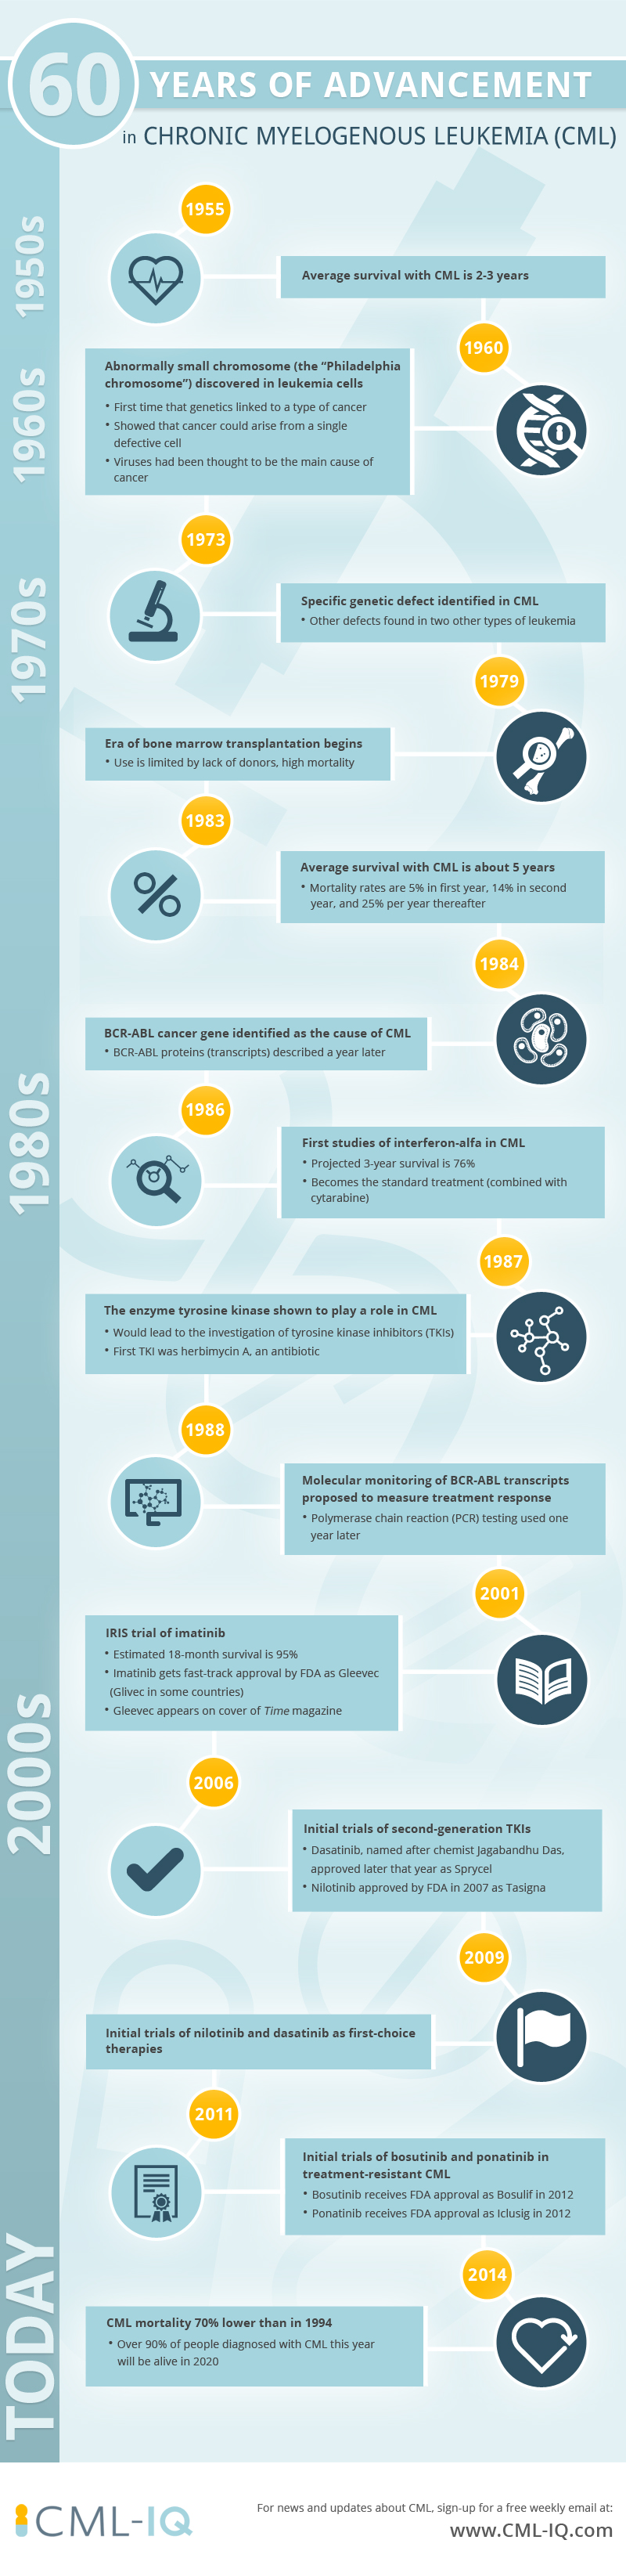 CML Infographic - 60 Years of Advancement in Diagnosis and Treatment